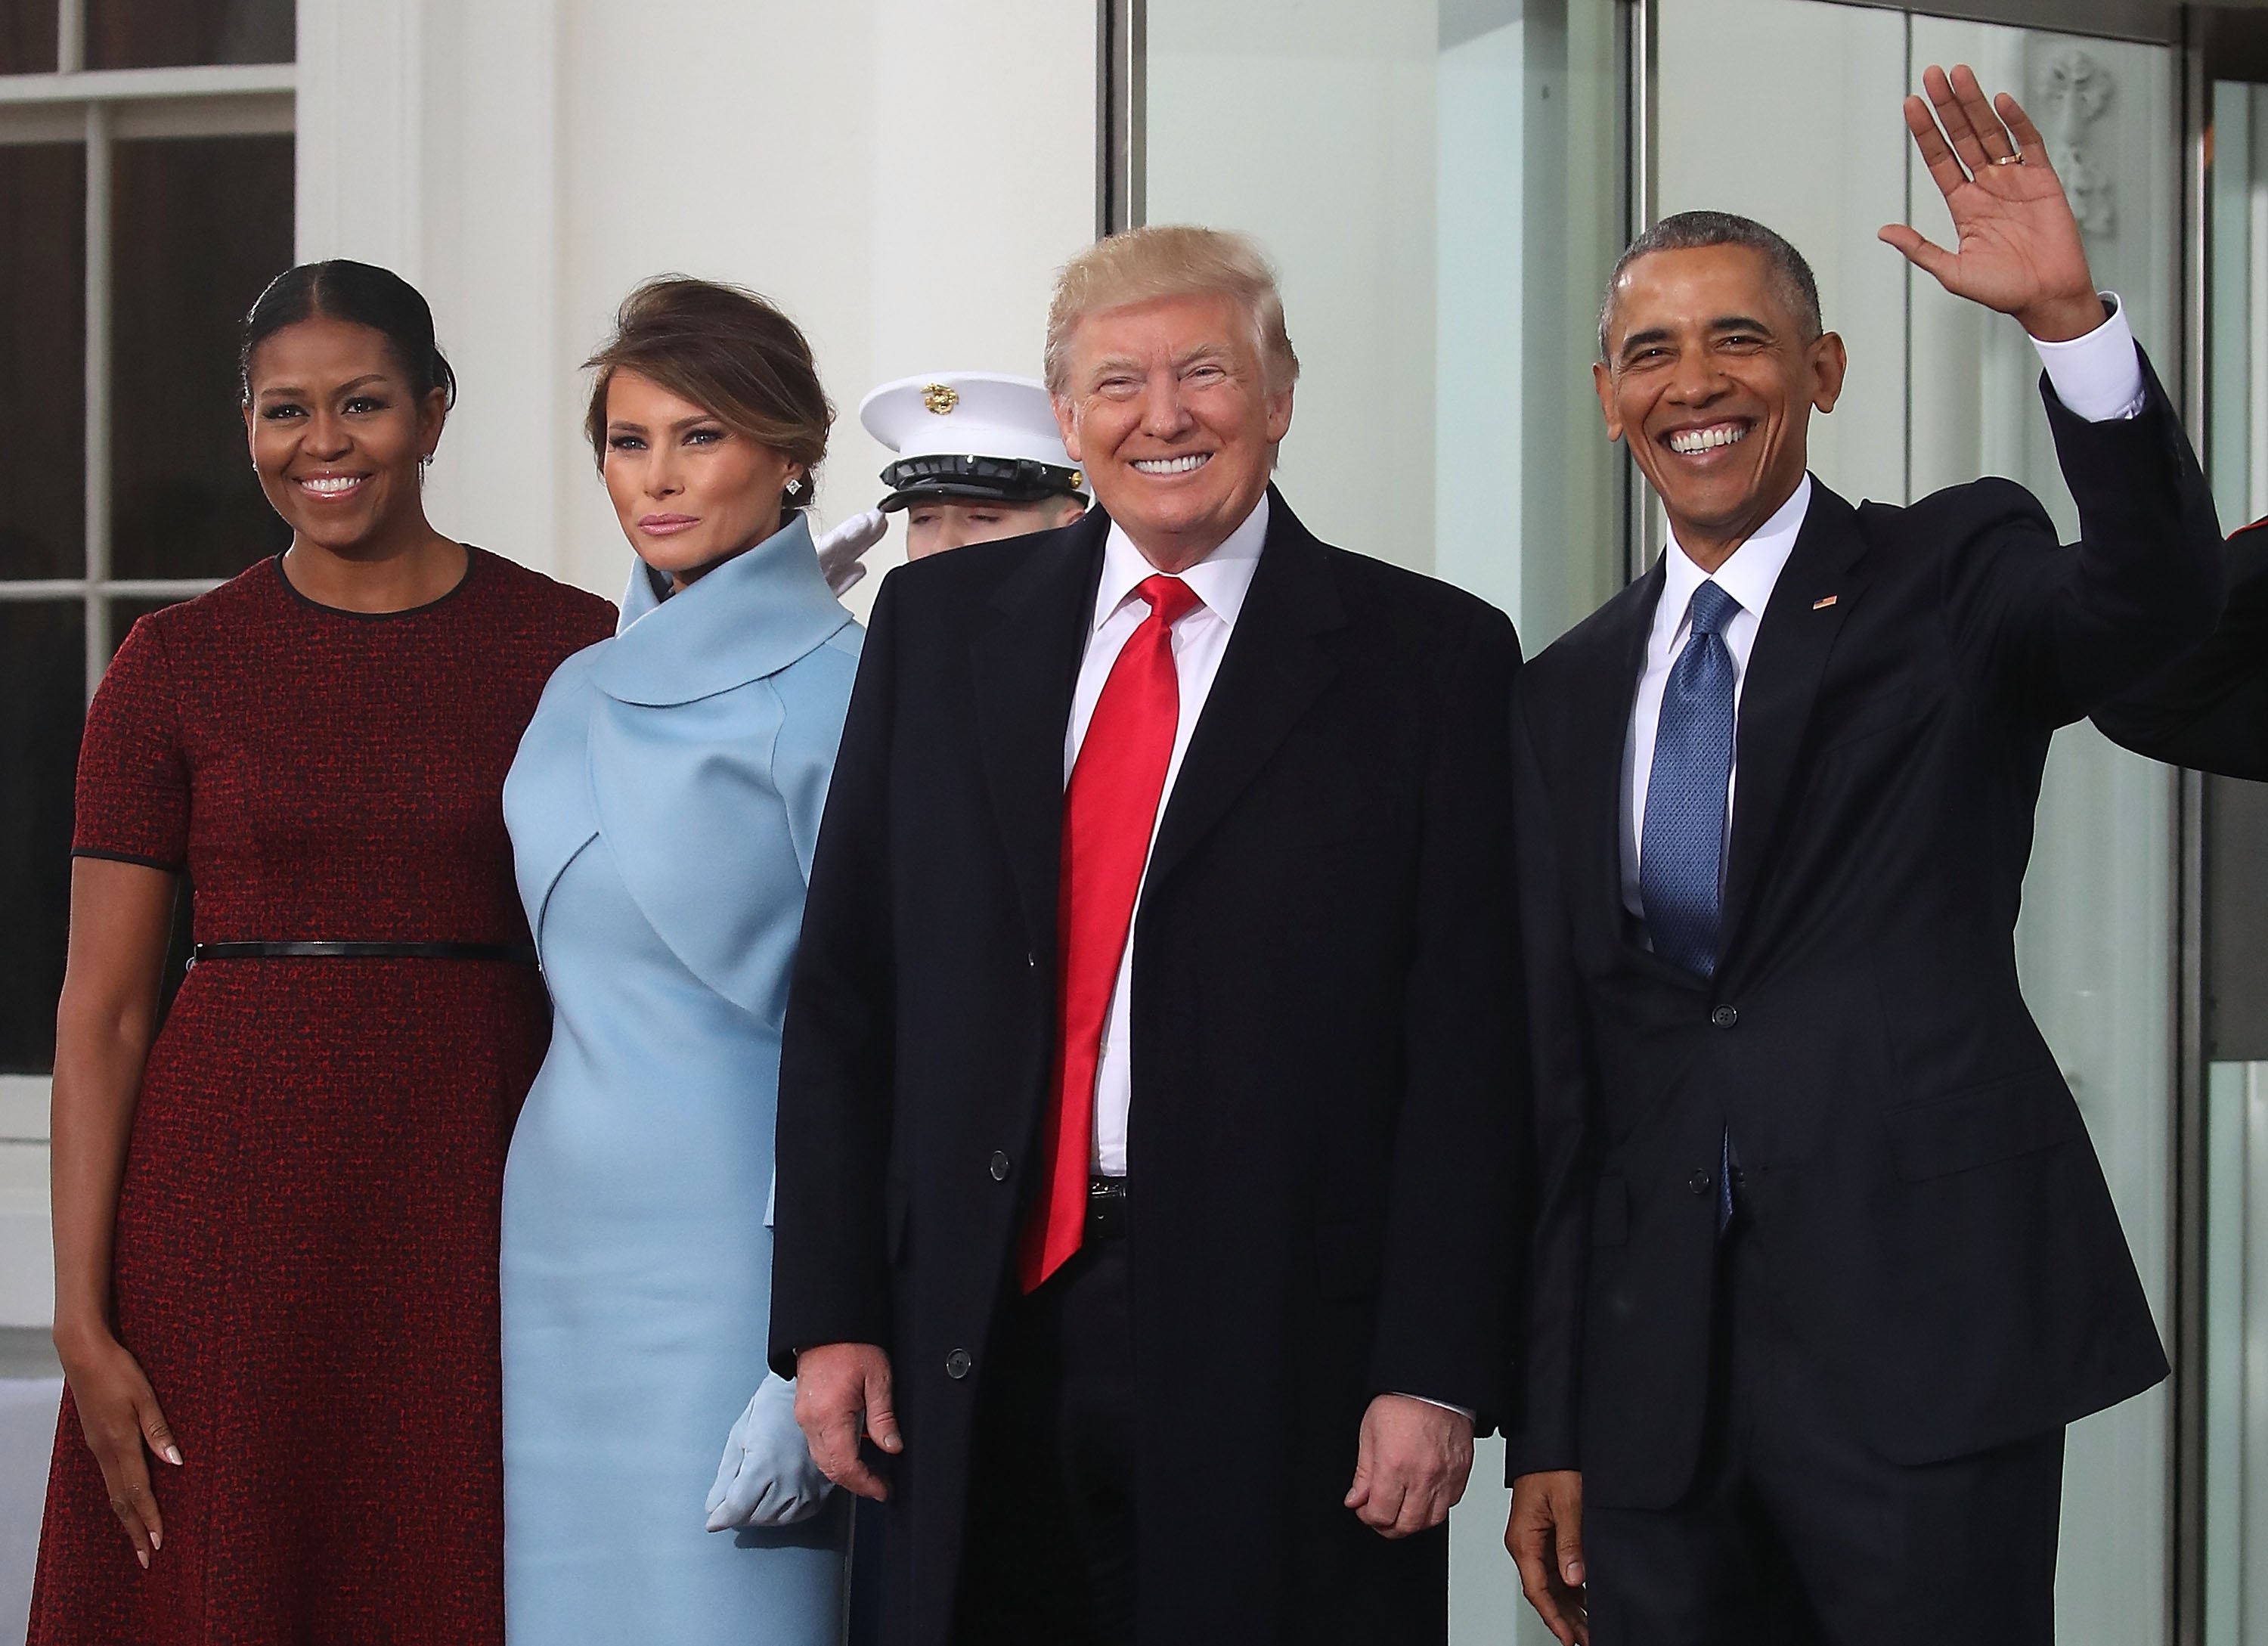 Donald Trump ,and his wife Melania Trump  are greeted by President Barack Obama and his wife first lady Michelle Obama, upon arriving at the White House on January 20, 2017. | Photo: GettyImages